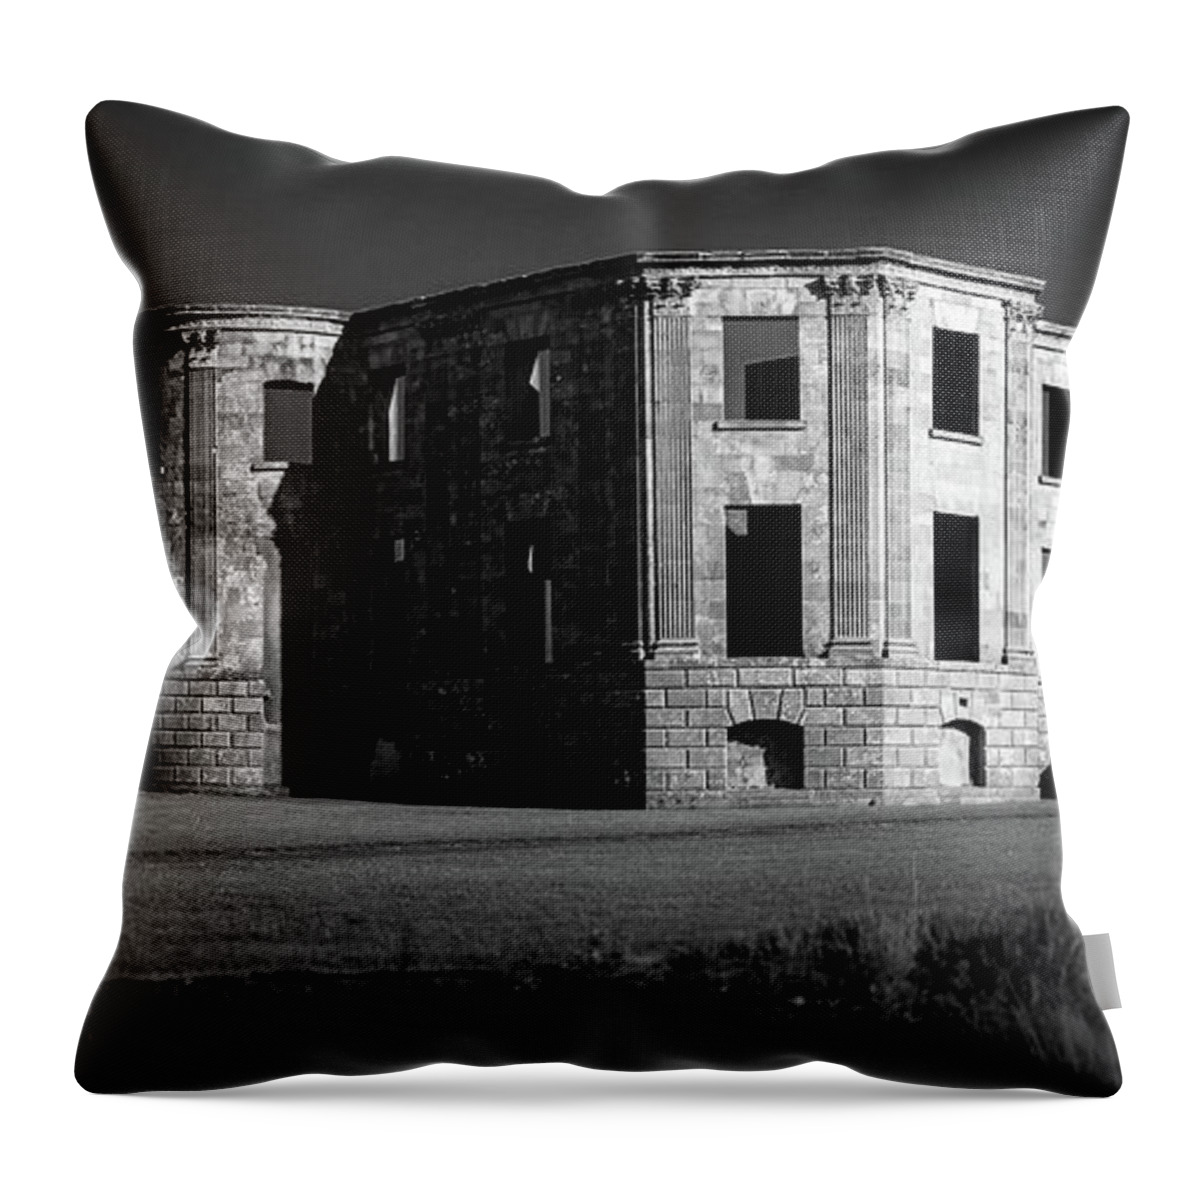 Downhillhouse Throw Pillow featuring the photograph Downhill Demesne Contrast by Vicky Edgerly